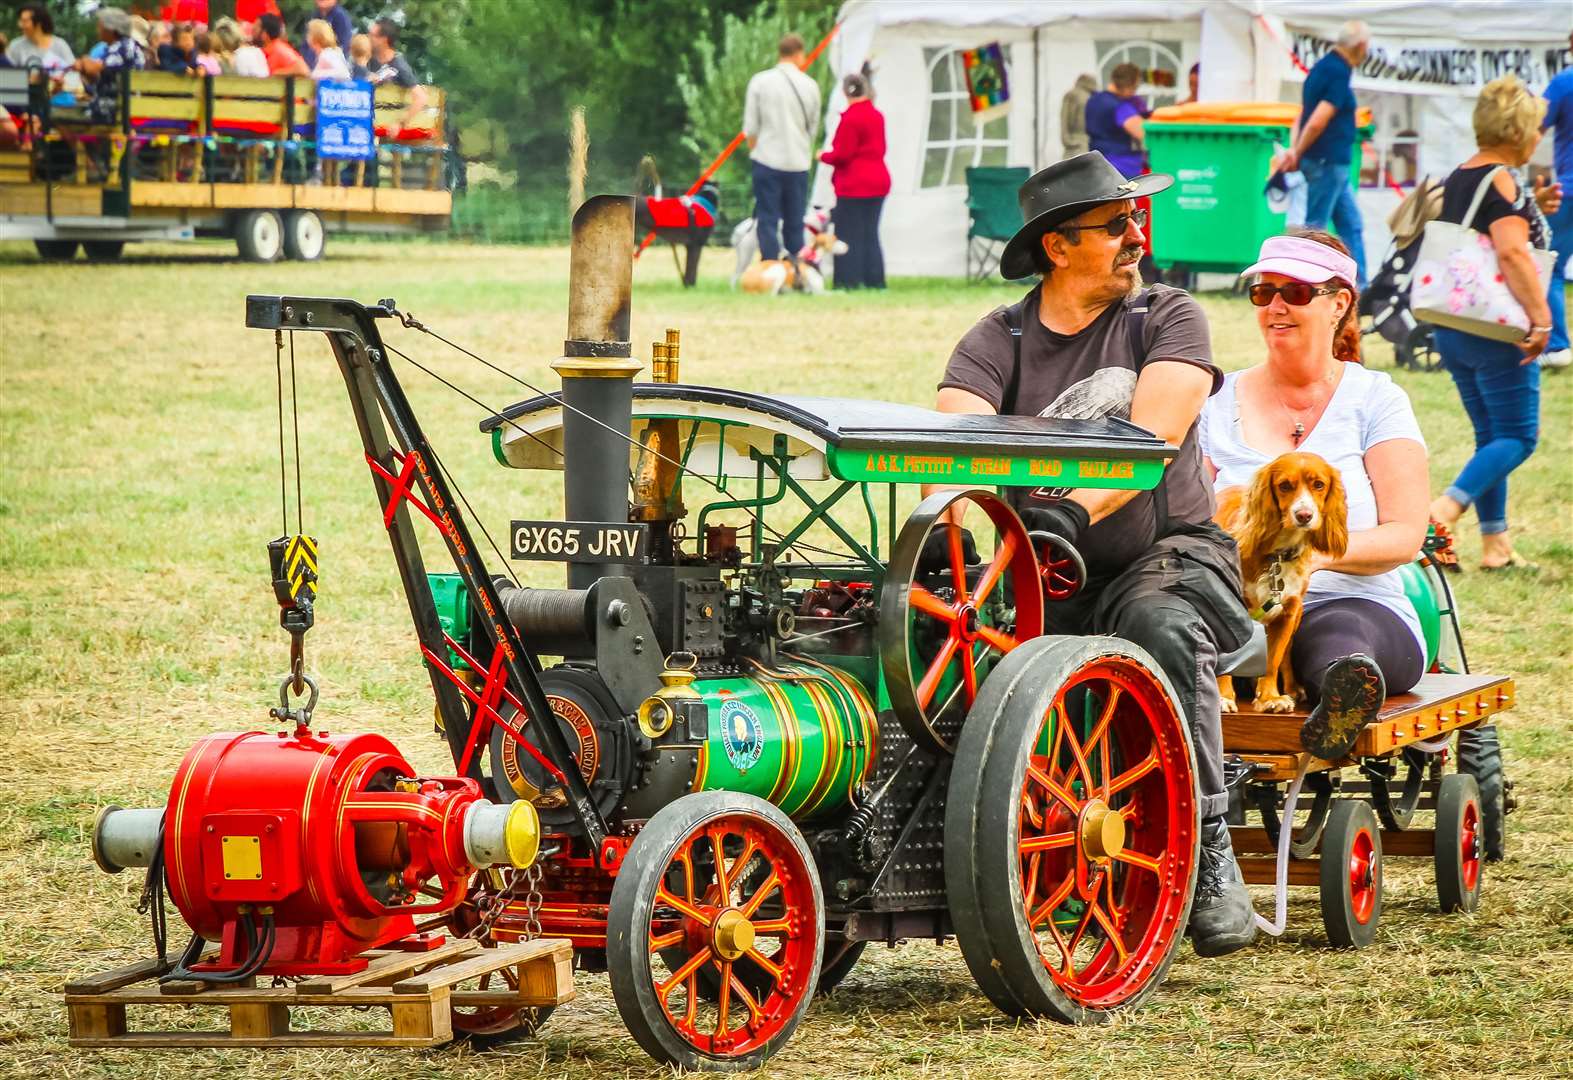 More than 200 tractors will be at the Biddenden Tractorfest this weekend